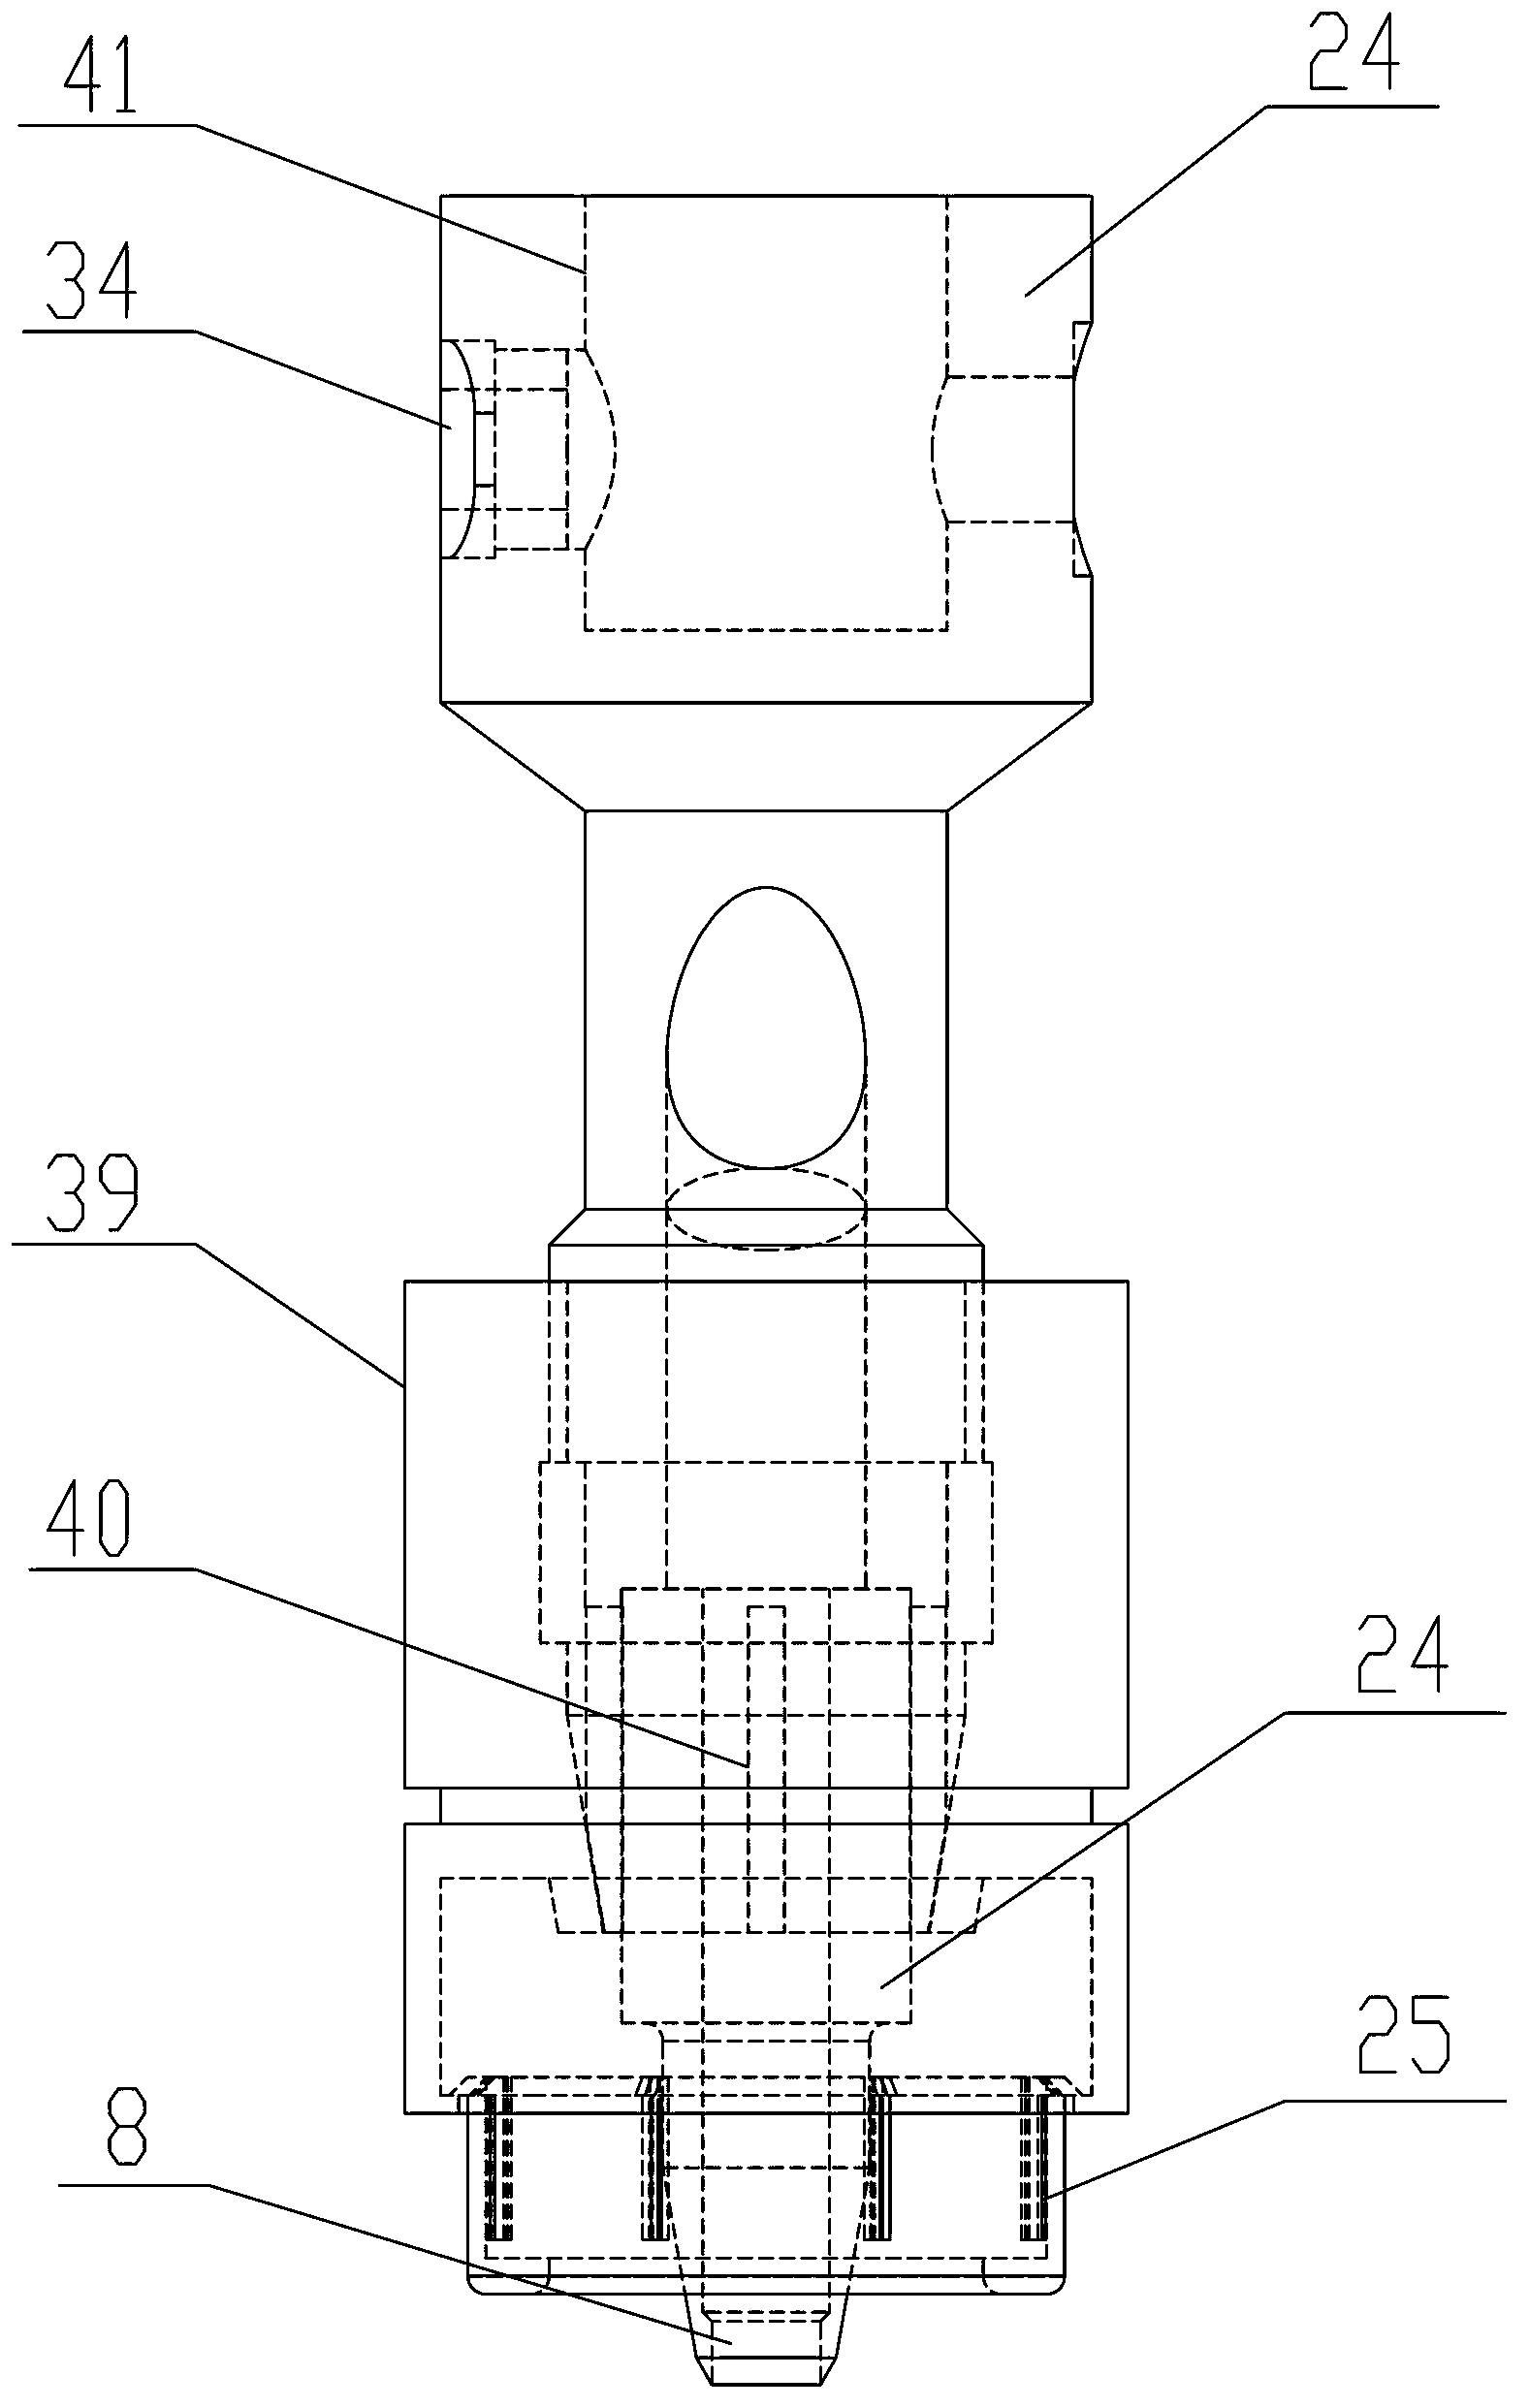 Rapid punching device for flexible material